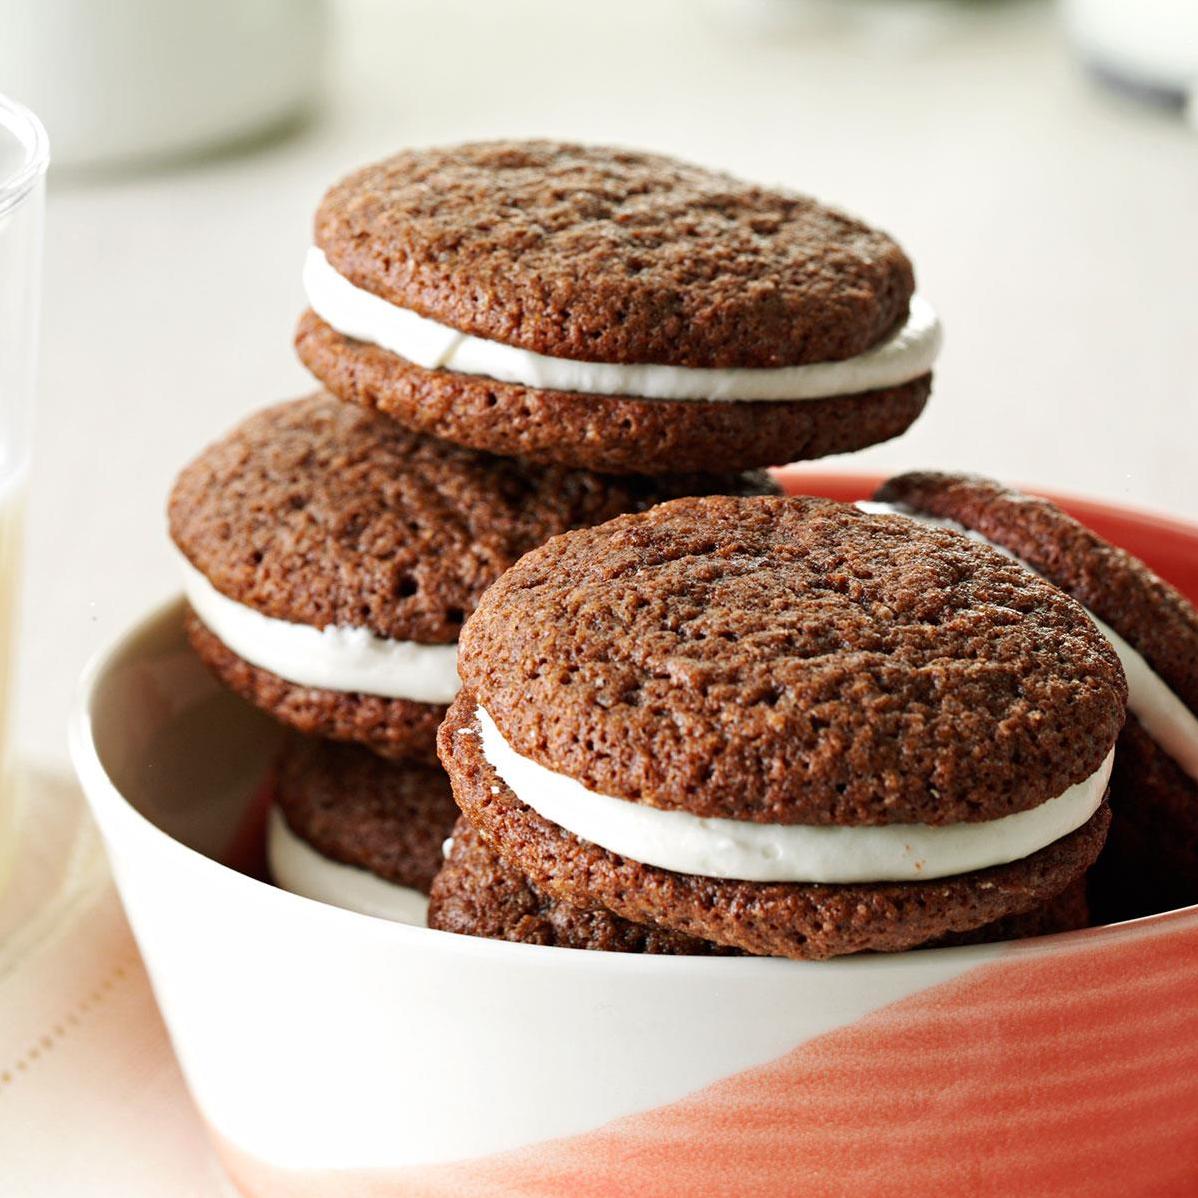  Satisfy your sweet tooth with just one bite of these heavenly cookies!